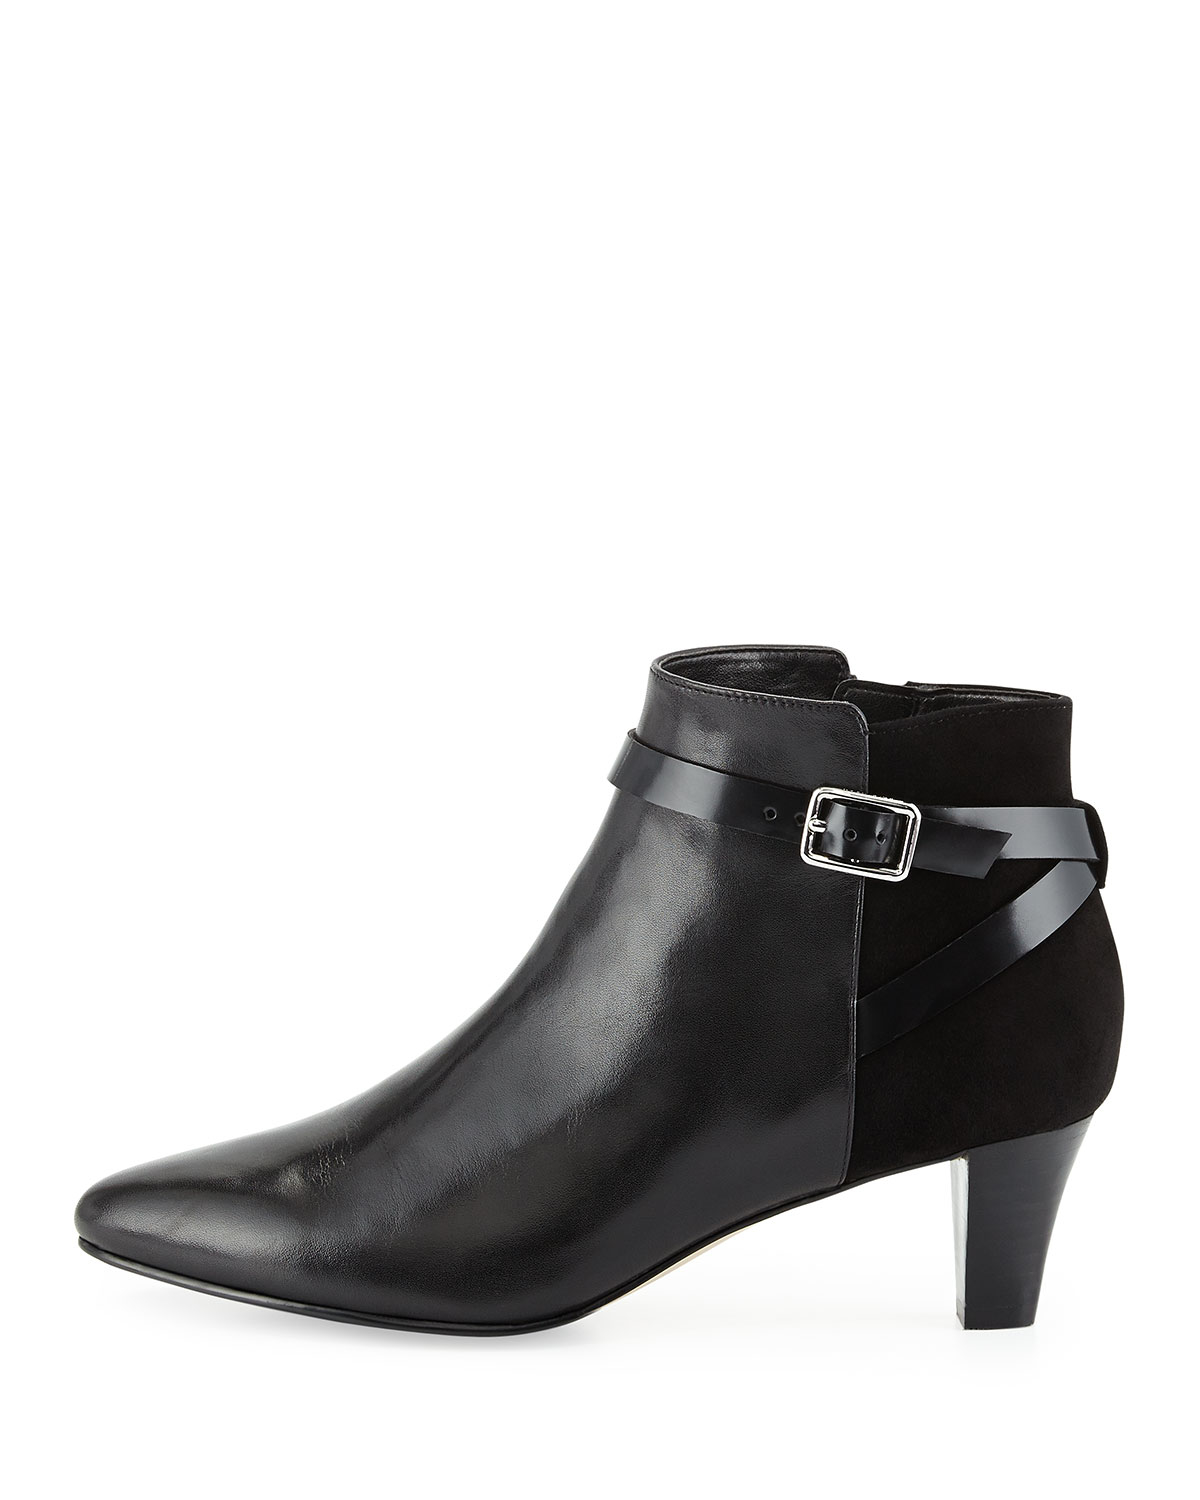 Lyst - Cole Haan Sylvan Leather Ankle Boots in Black